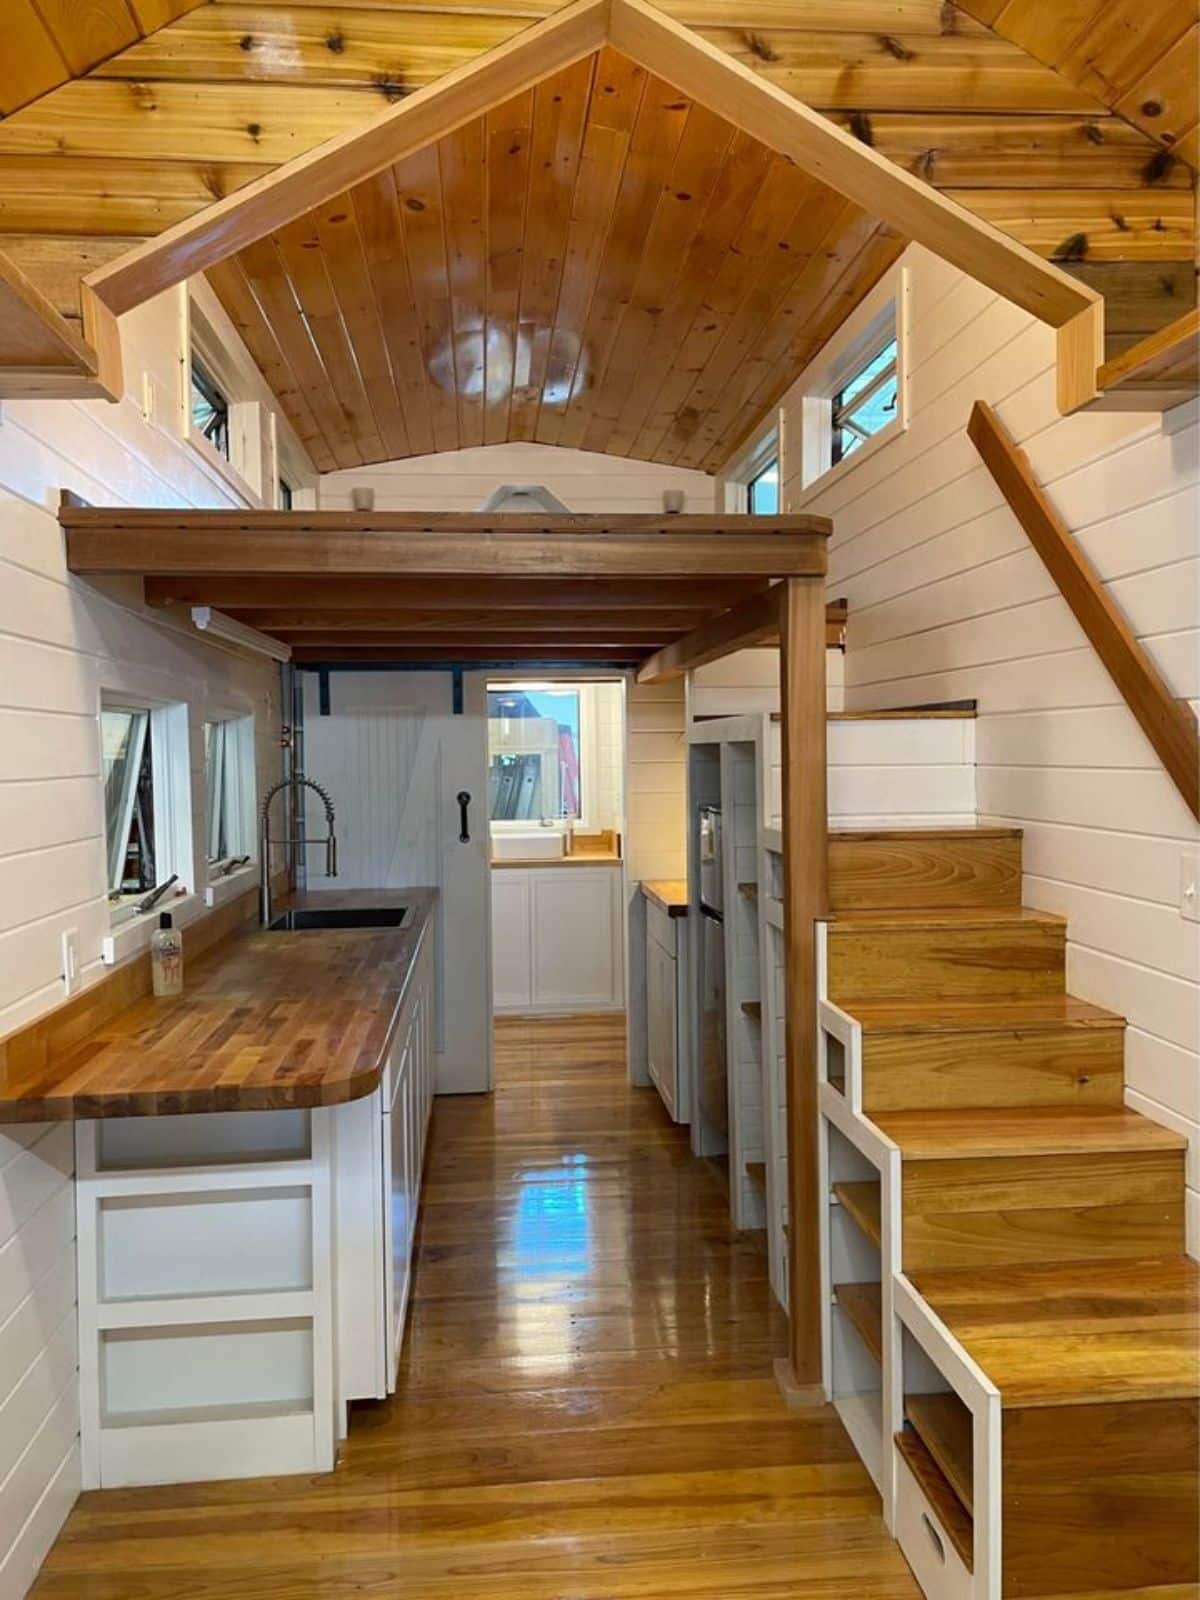 Overall interiors and lots of storages of 1 bedroom tiny house